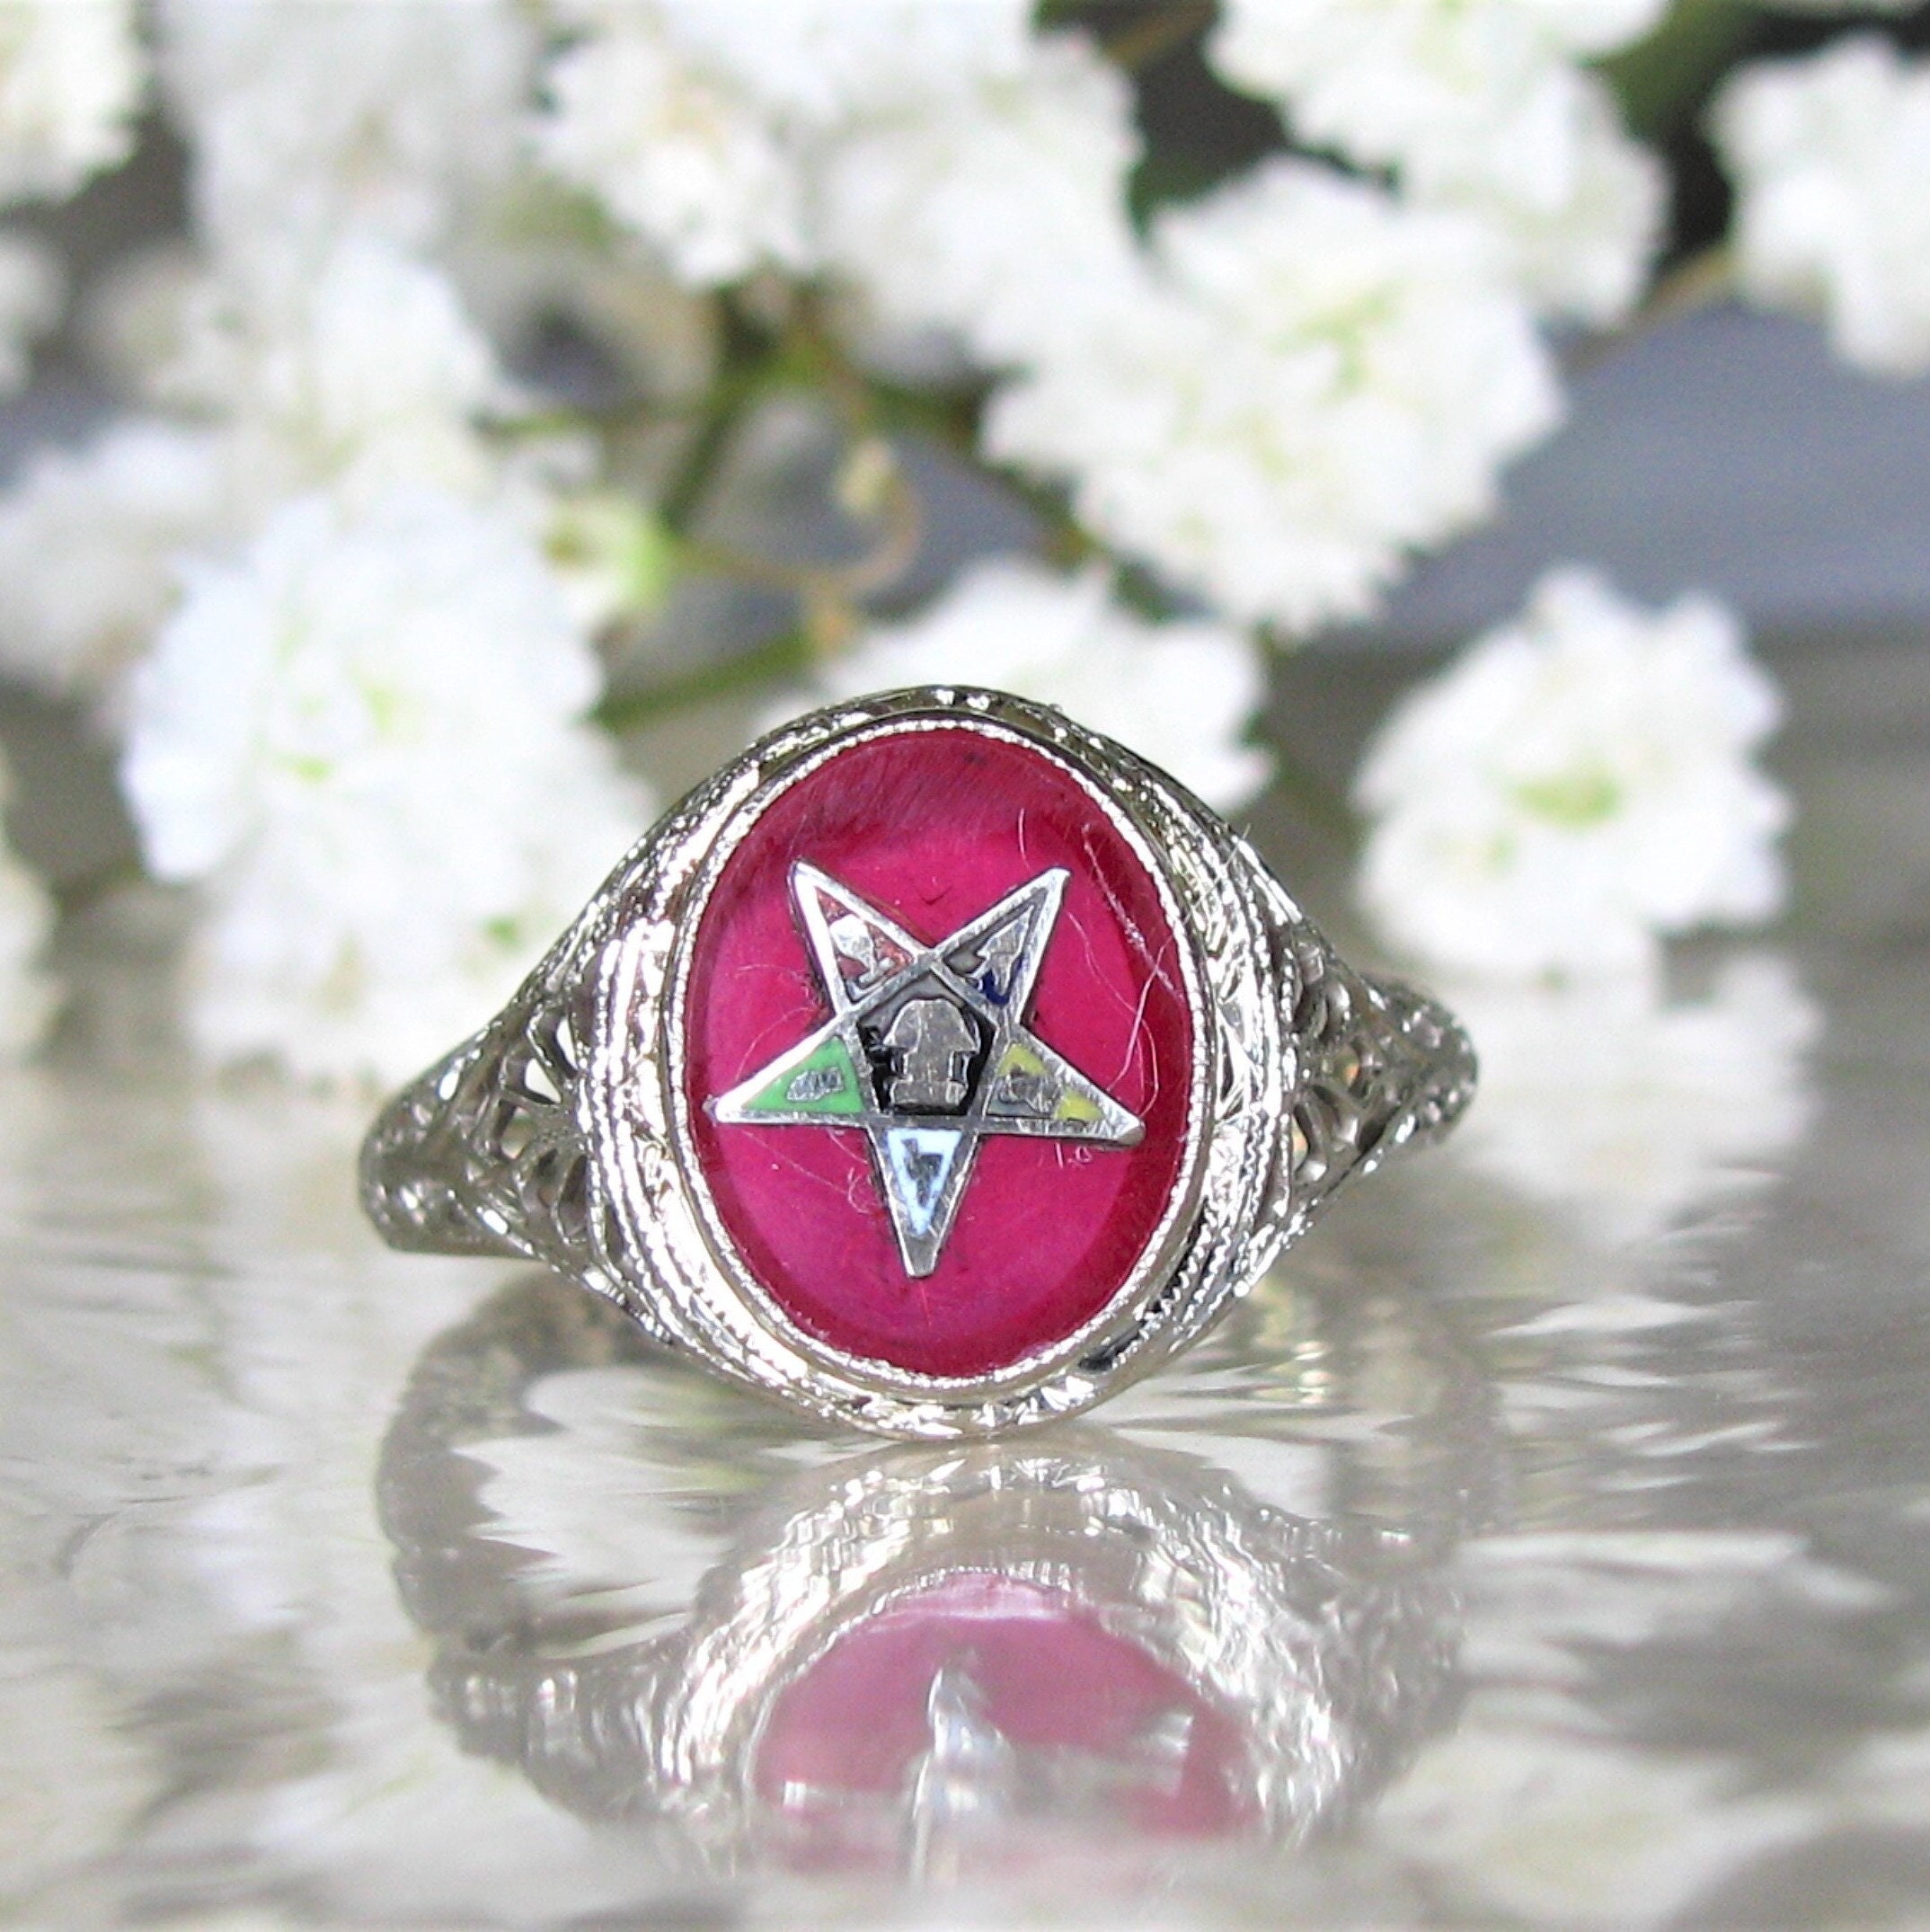 Colour Blossom Mini Star Ring, Pink Gold, Pink Mother-Of-Pearl And